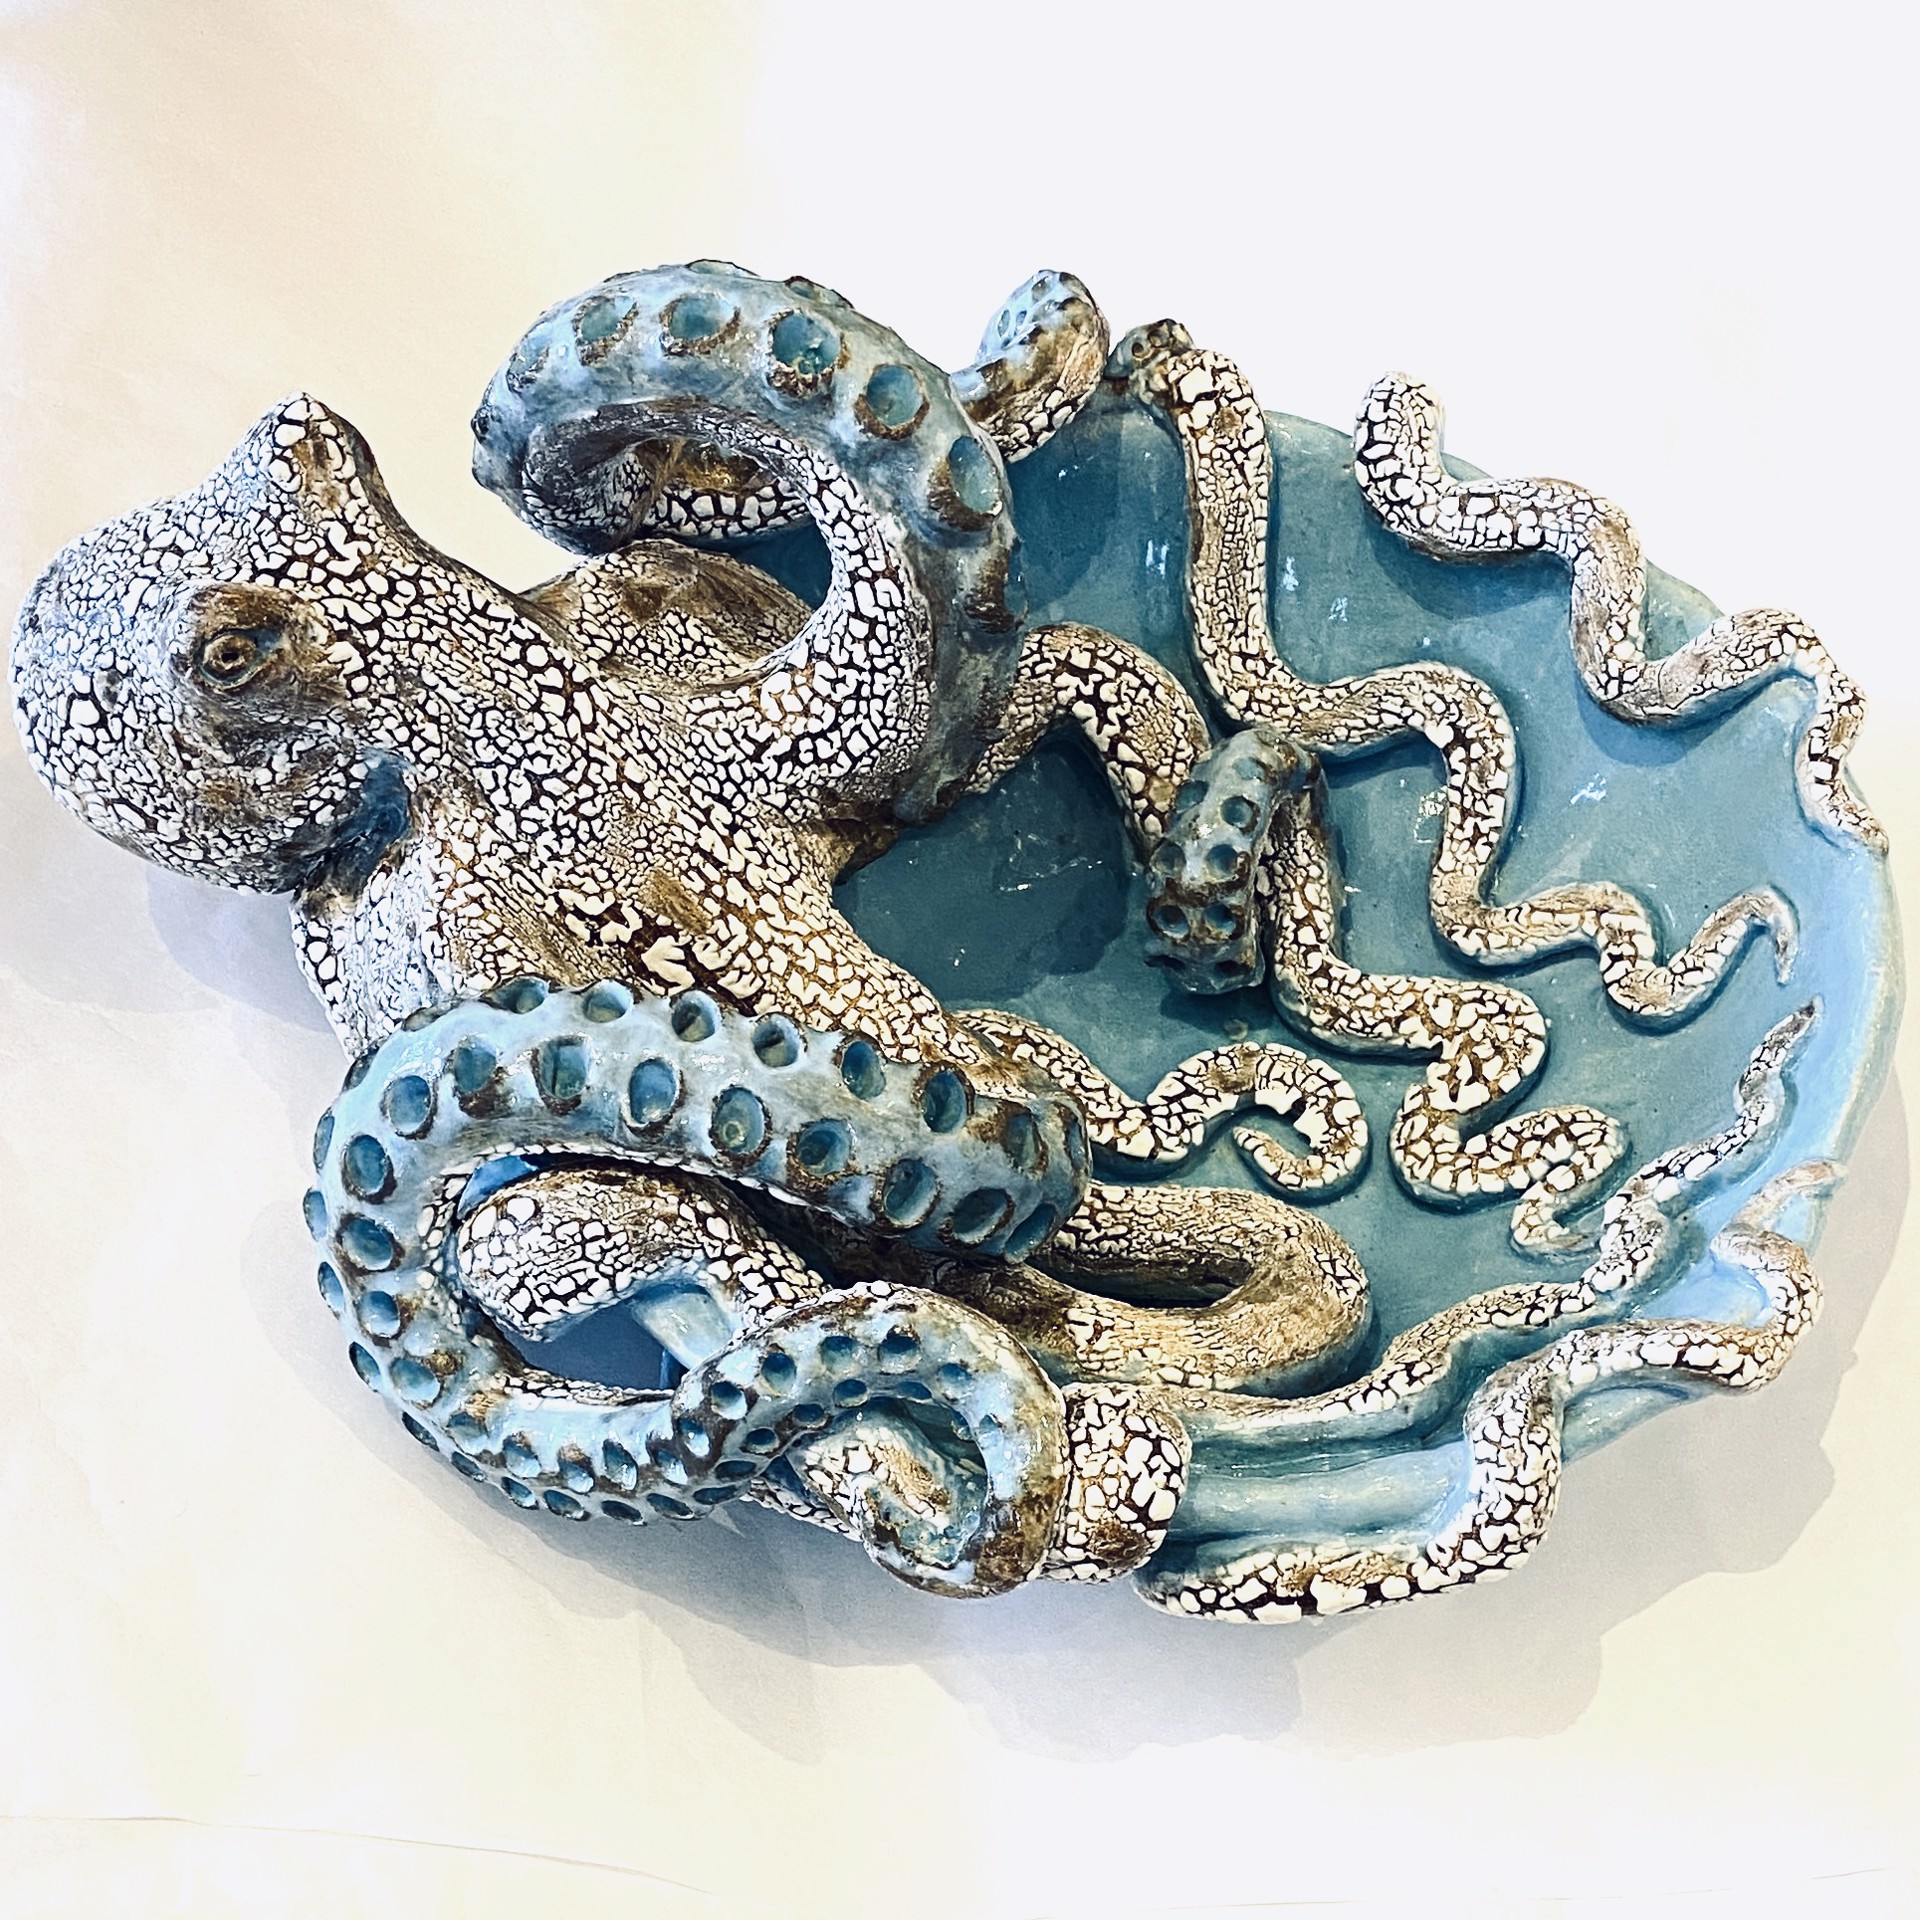 Large Octopus Bowl, Caribbean Blue SG23-51 by Shayne Greco